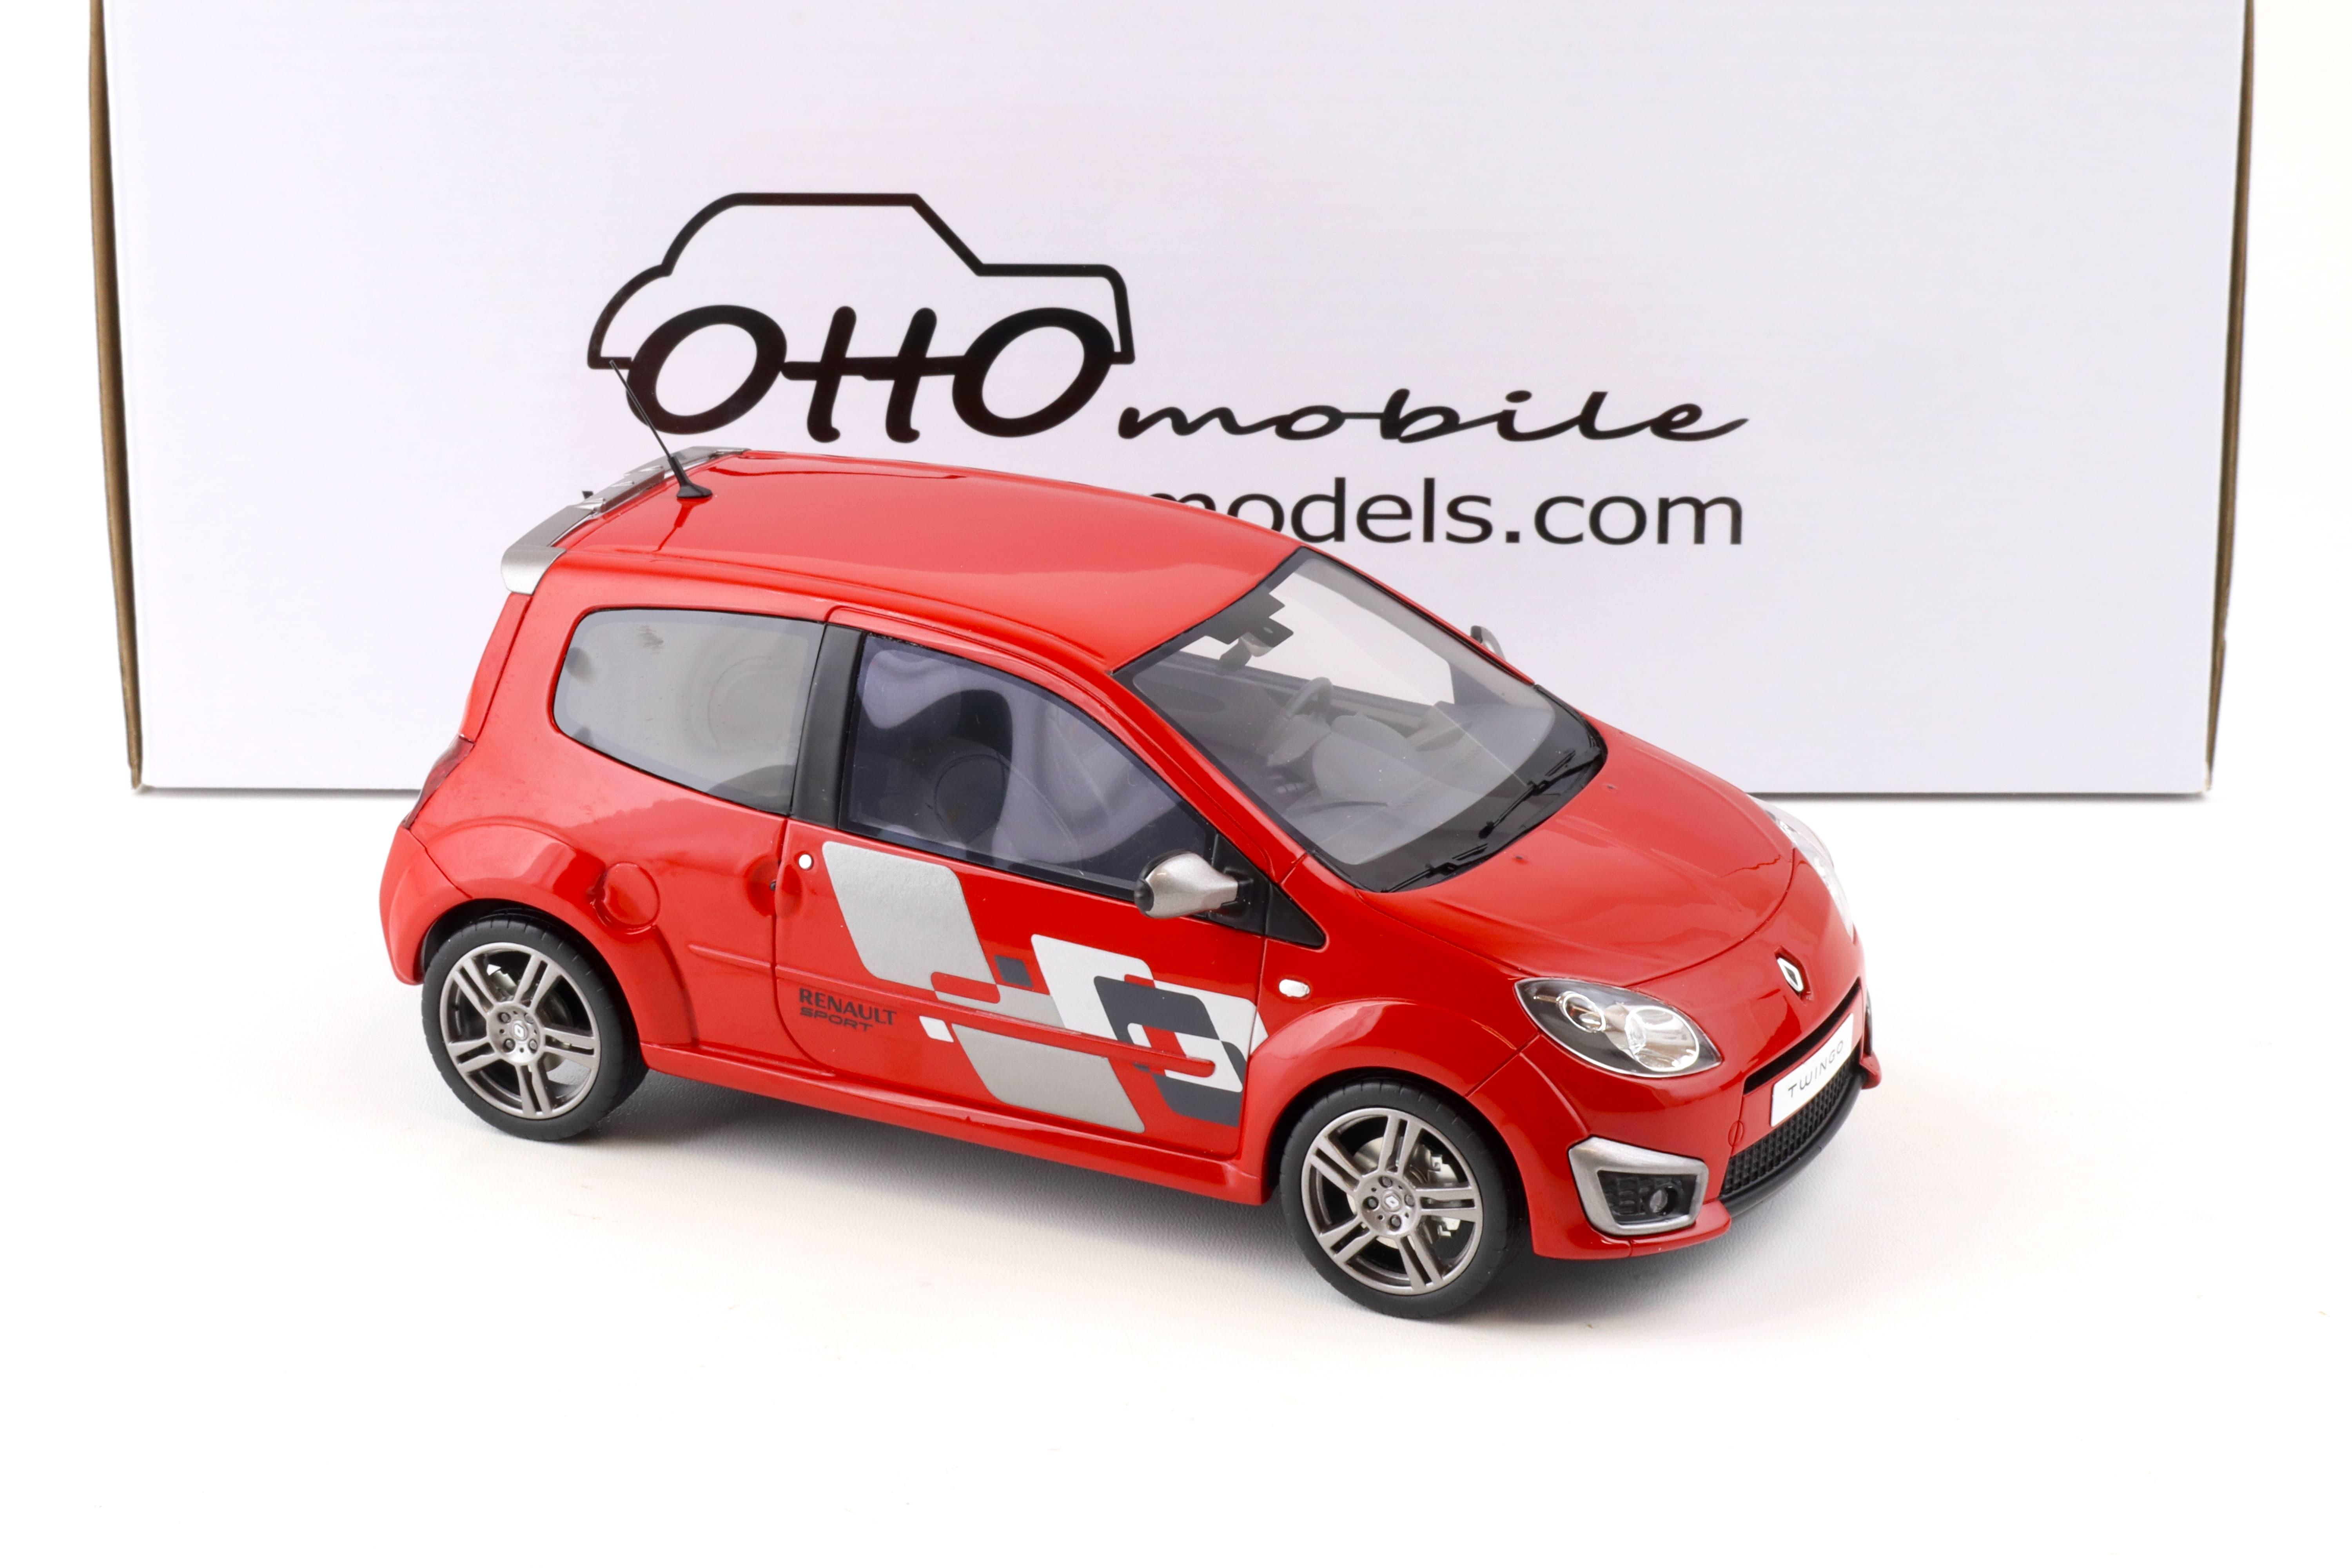 1:18 OTTO mobile OT446 Renault Twingo RS Phase 1 red 2008